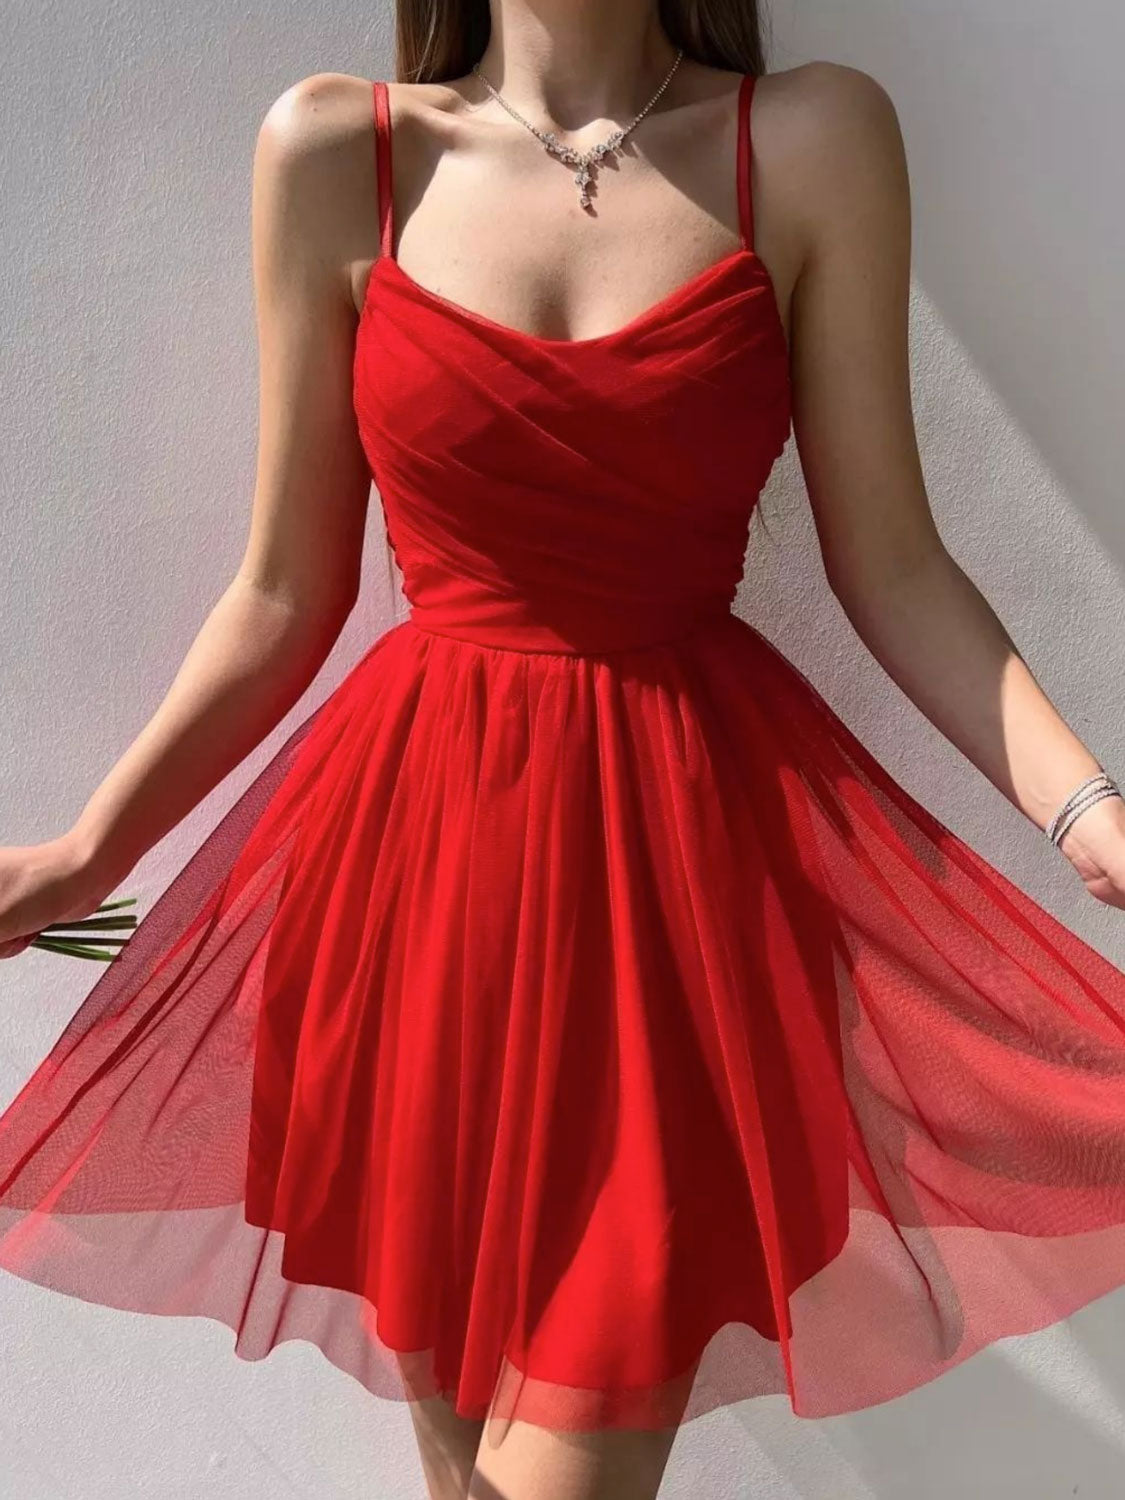 Simple Red Short Prom Dress,A Line Chiffon Cocktail Party Dress